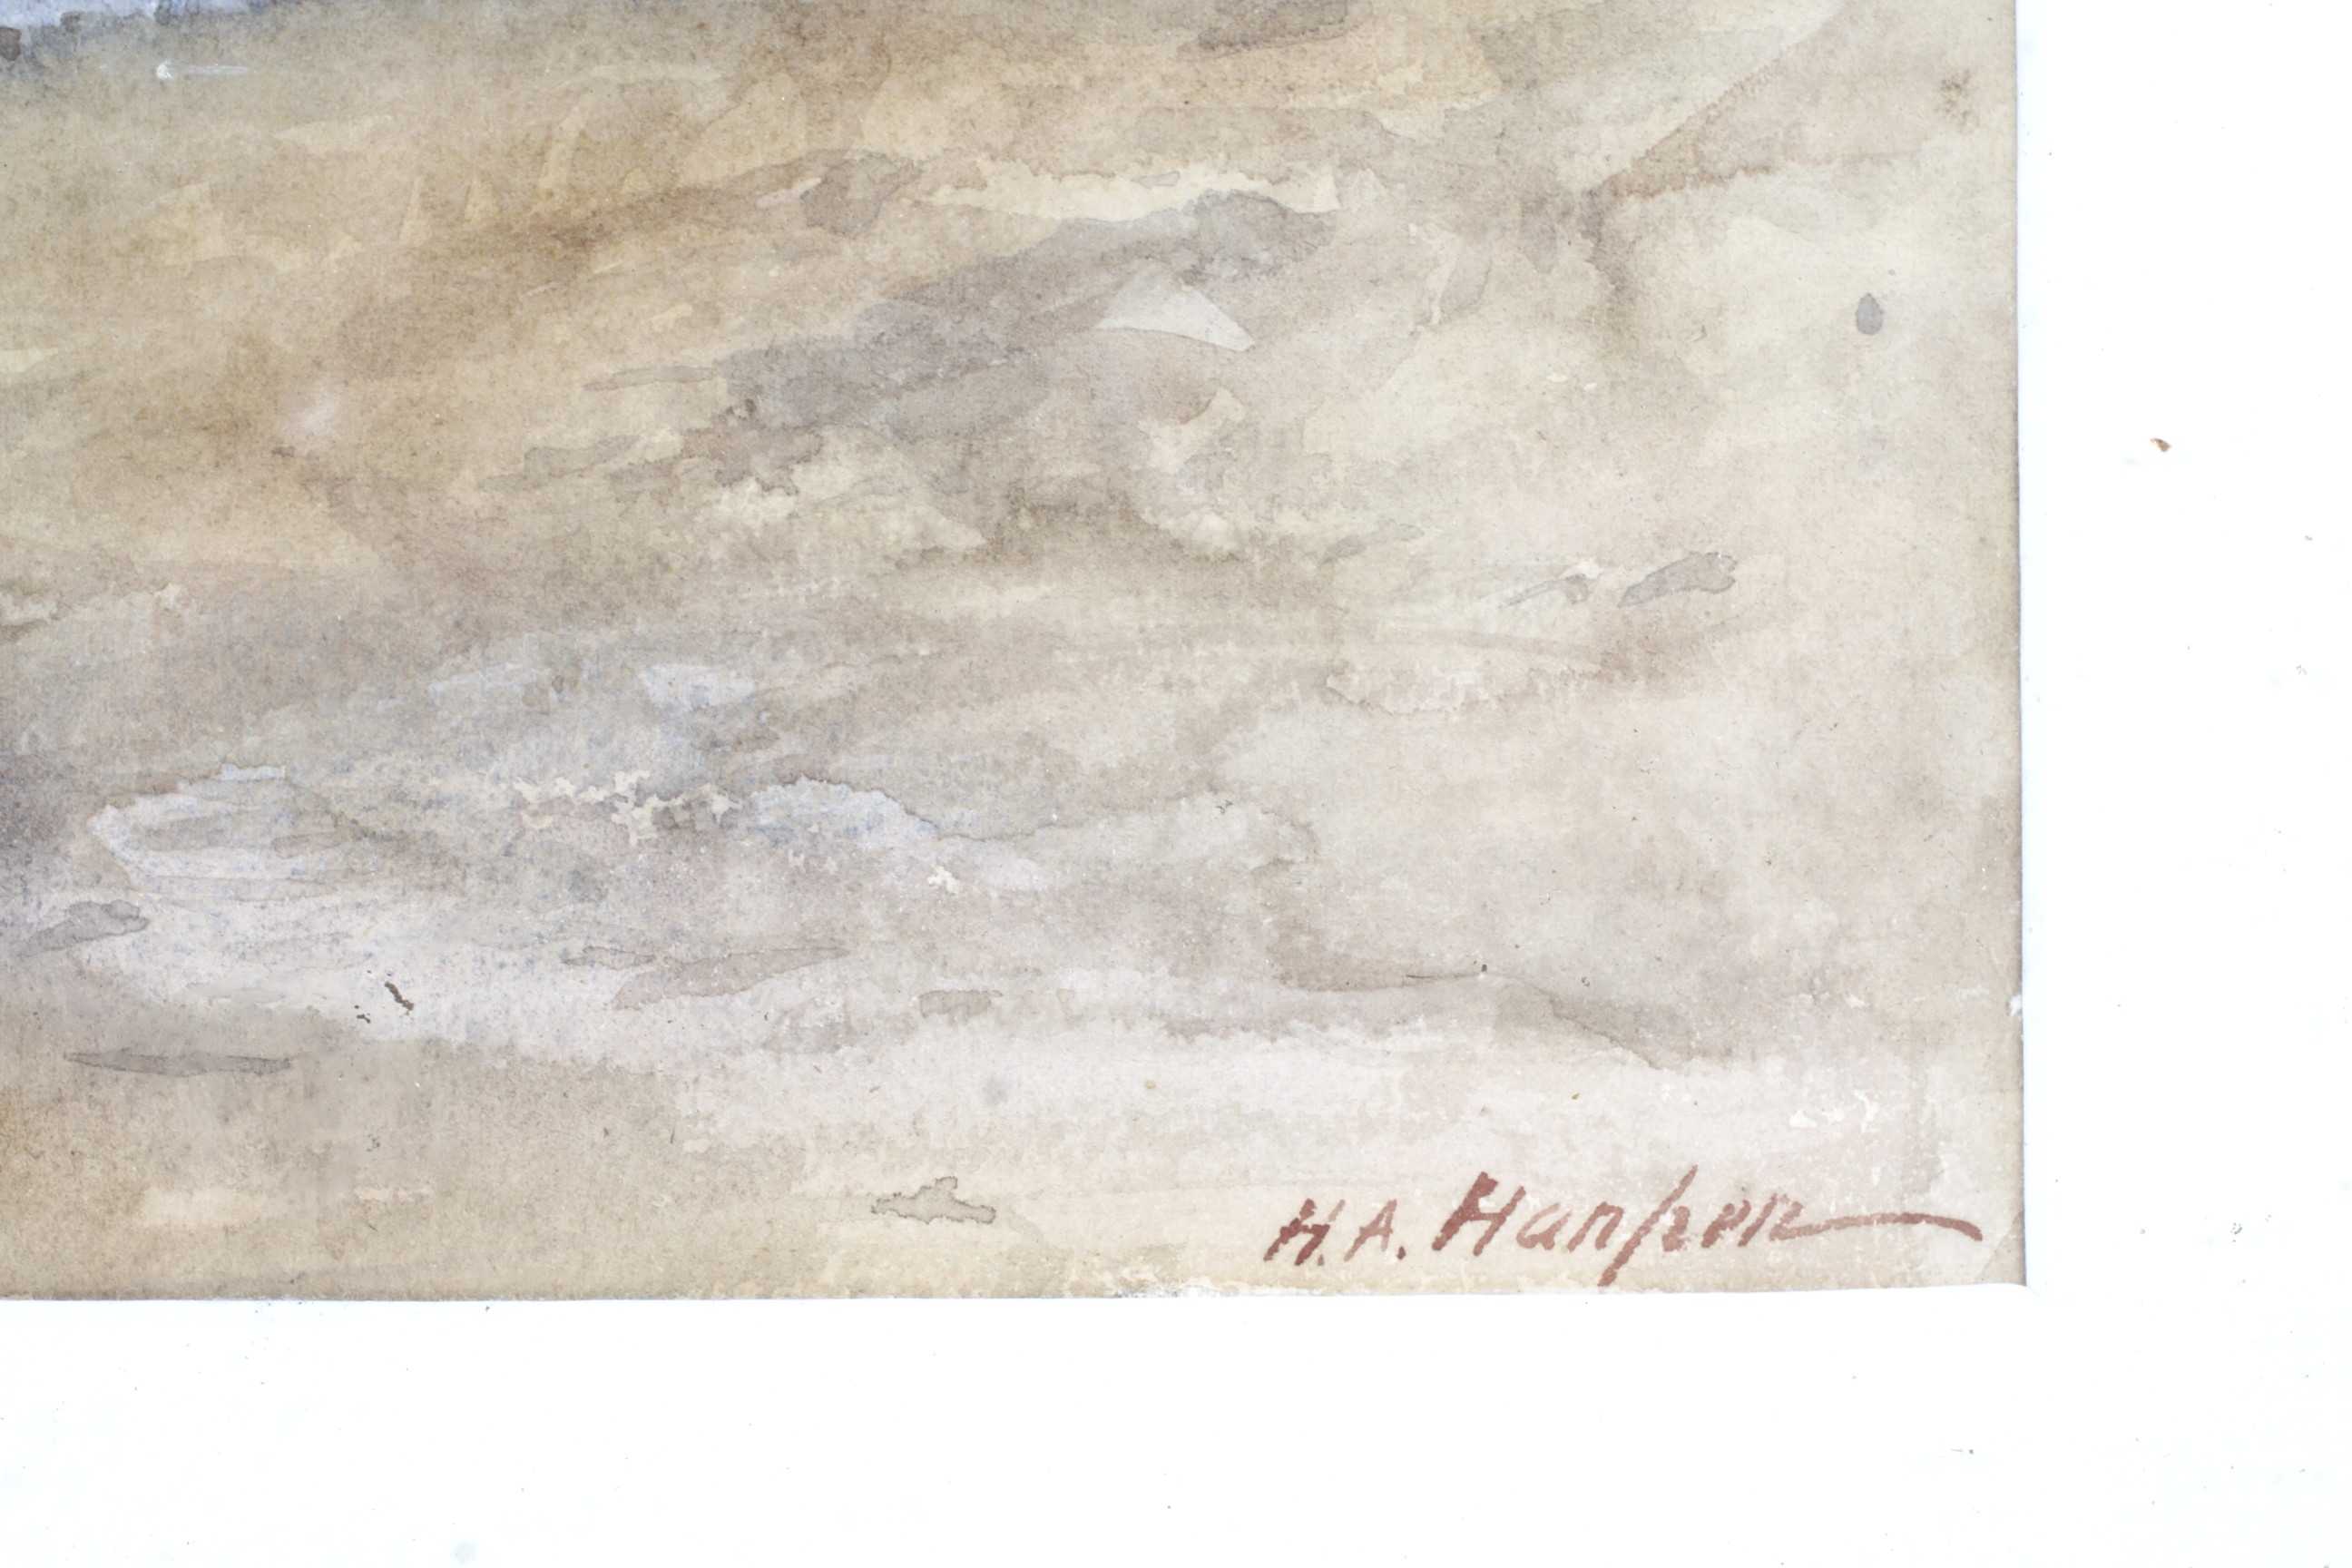 Henry Andrew Harper (1835-1900), watercolour, The Highlands to the Scottish Mountain range. - Image 2 of 3